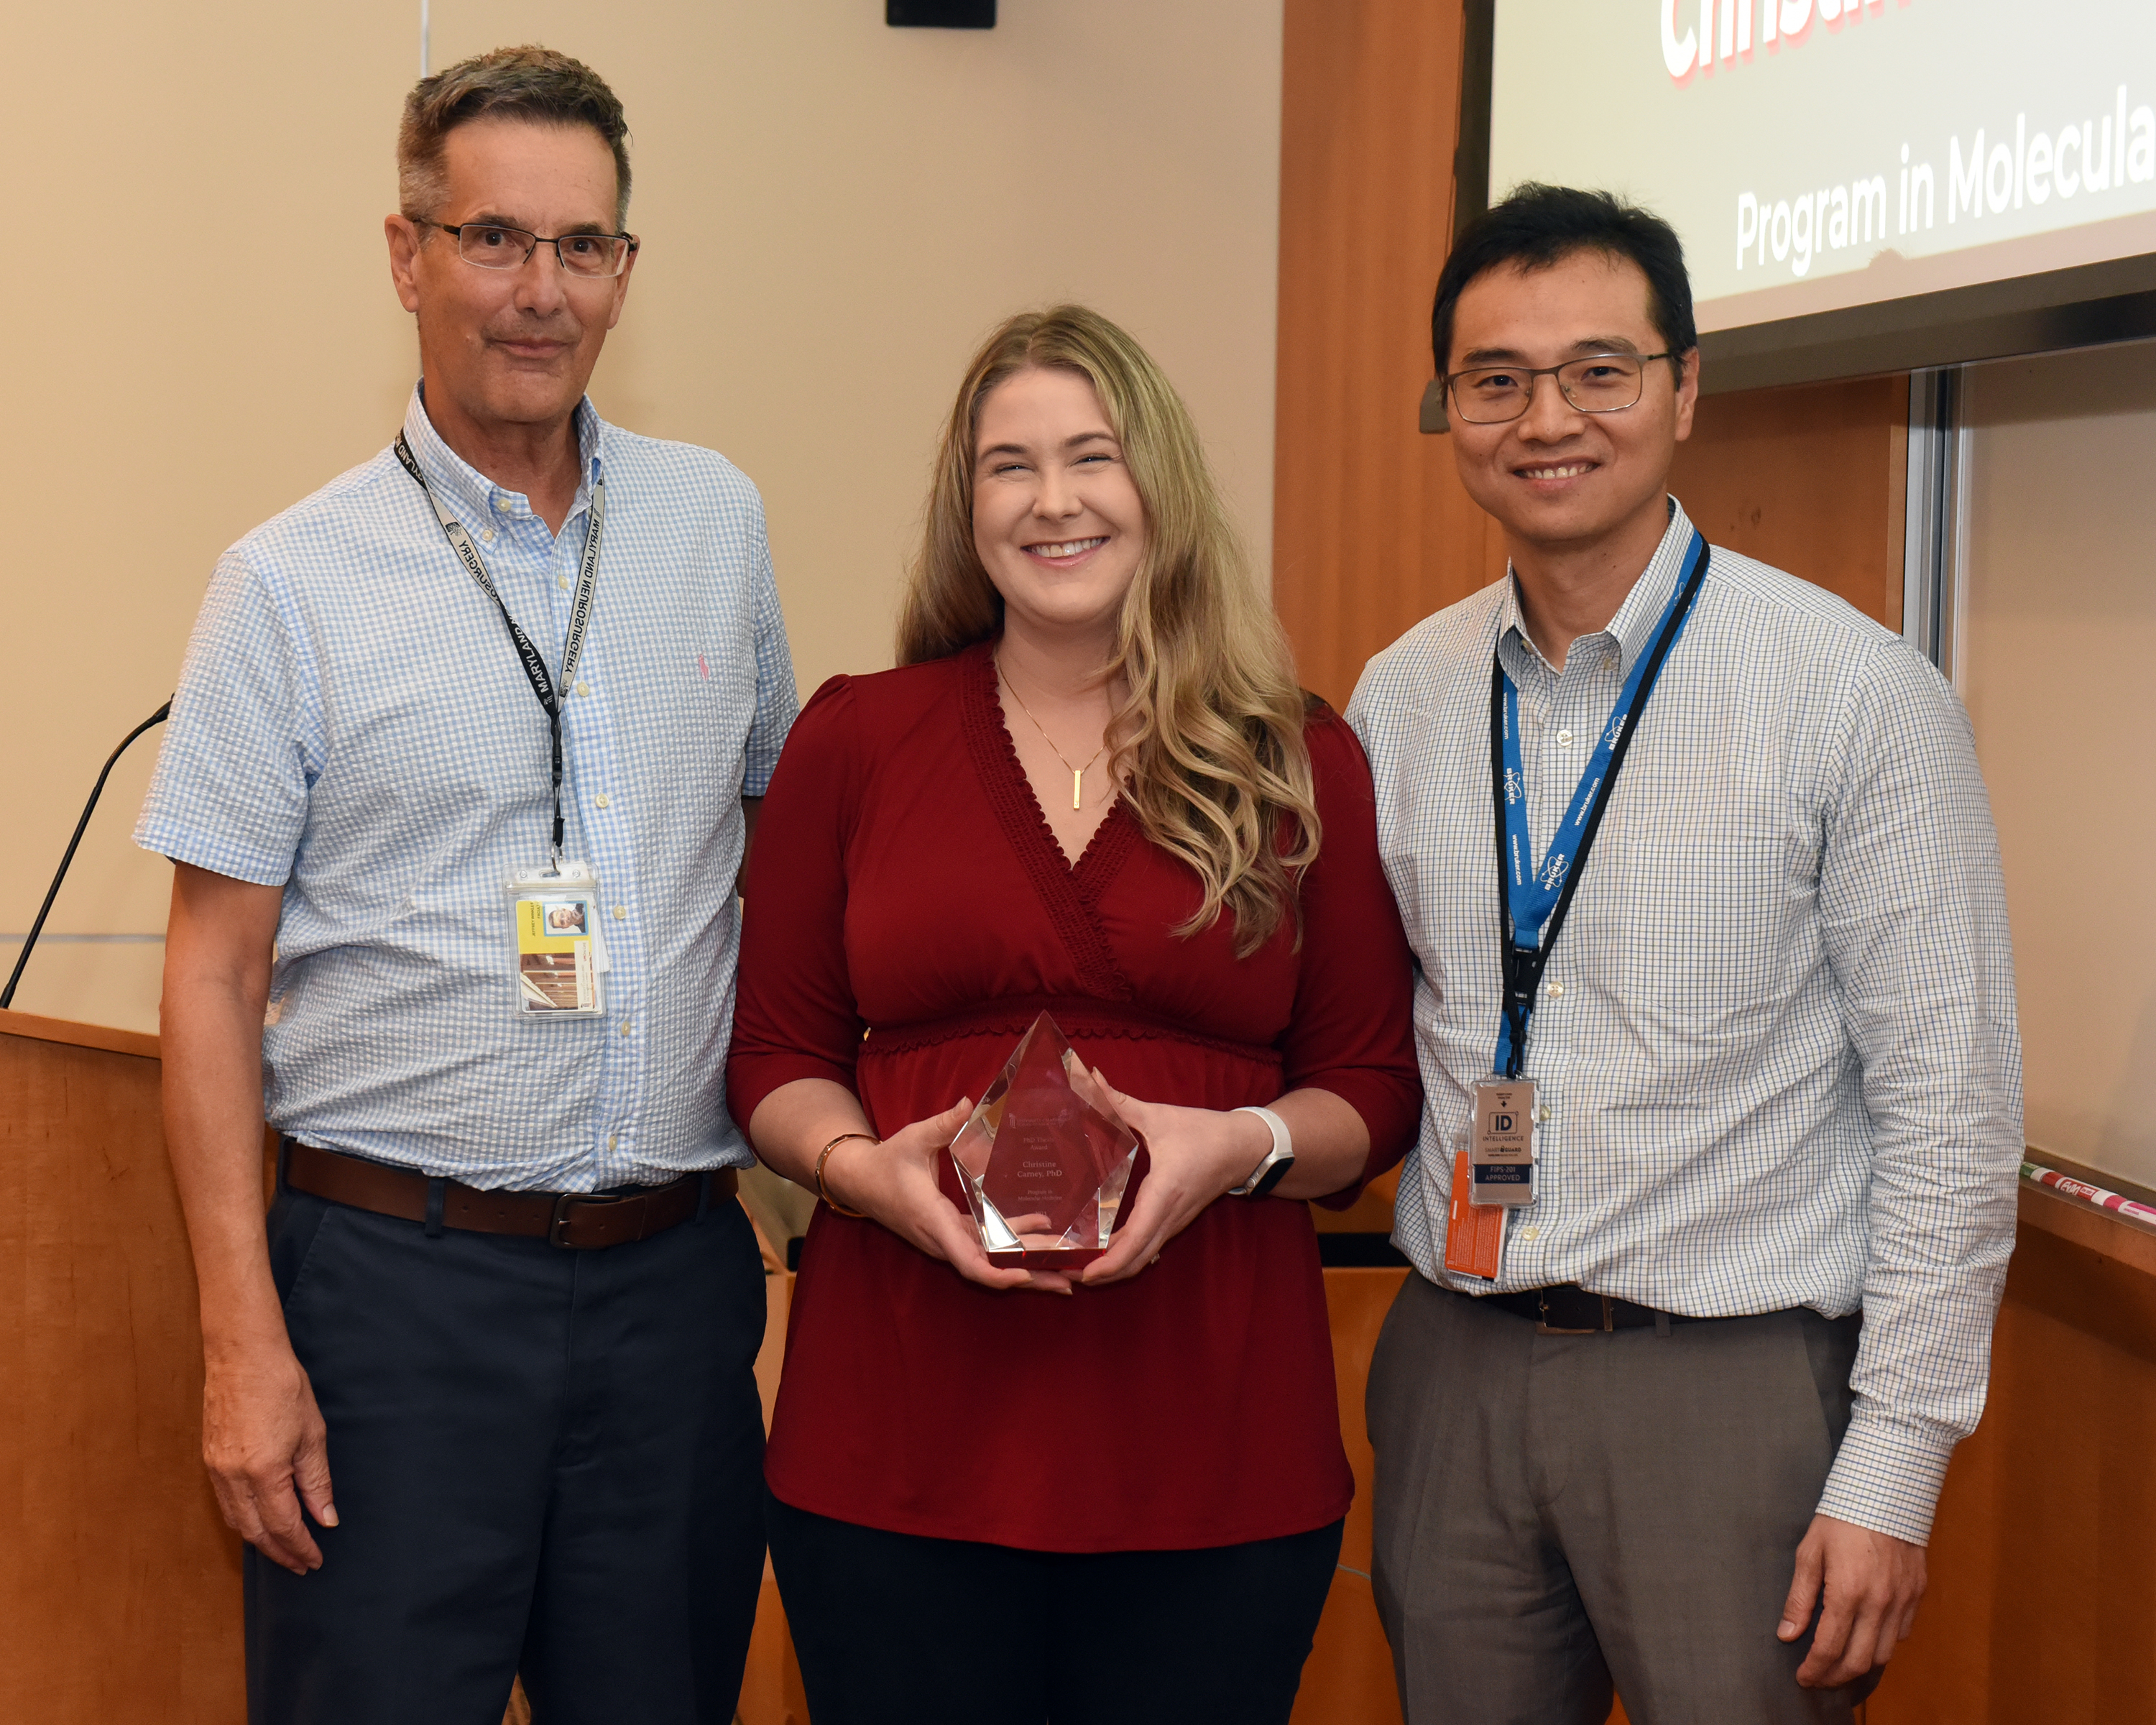 Dr. Jeff Winkles, Dr. Christine Carney, and Dr. Anthony Kim are standing together. Dr. Carney is holding her PhD Thesis Award.